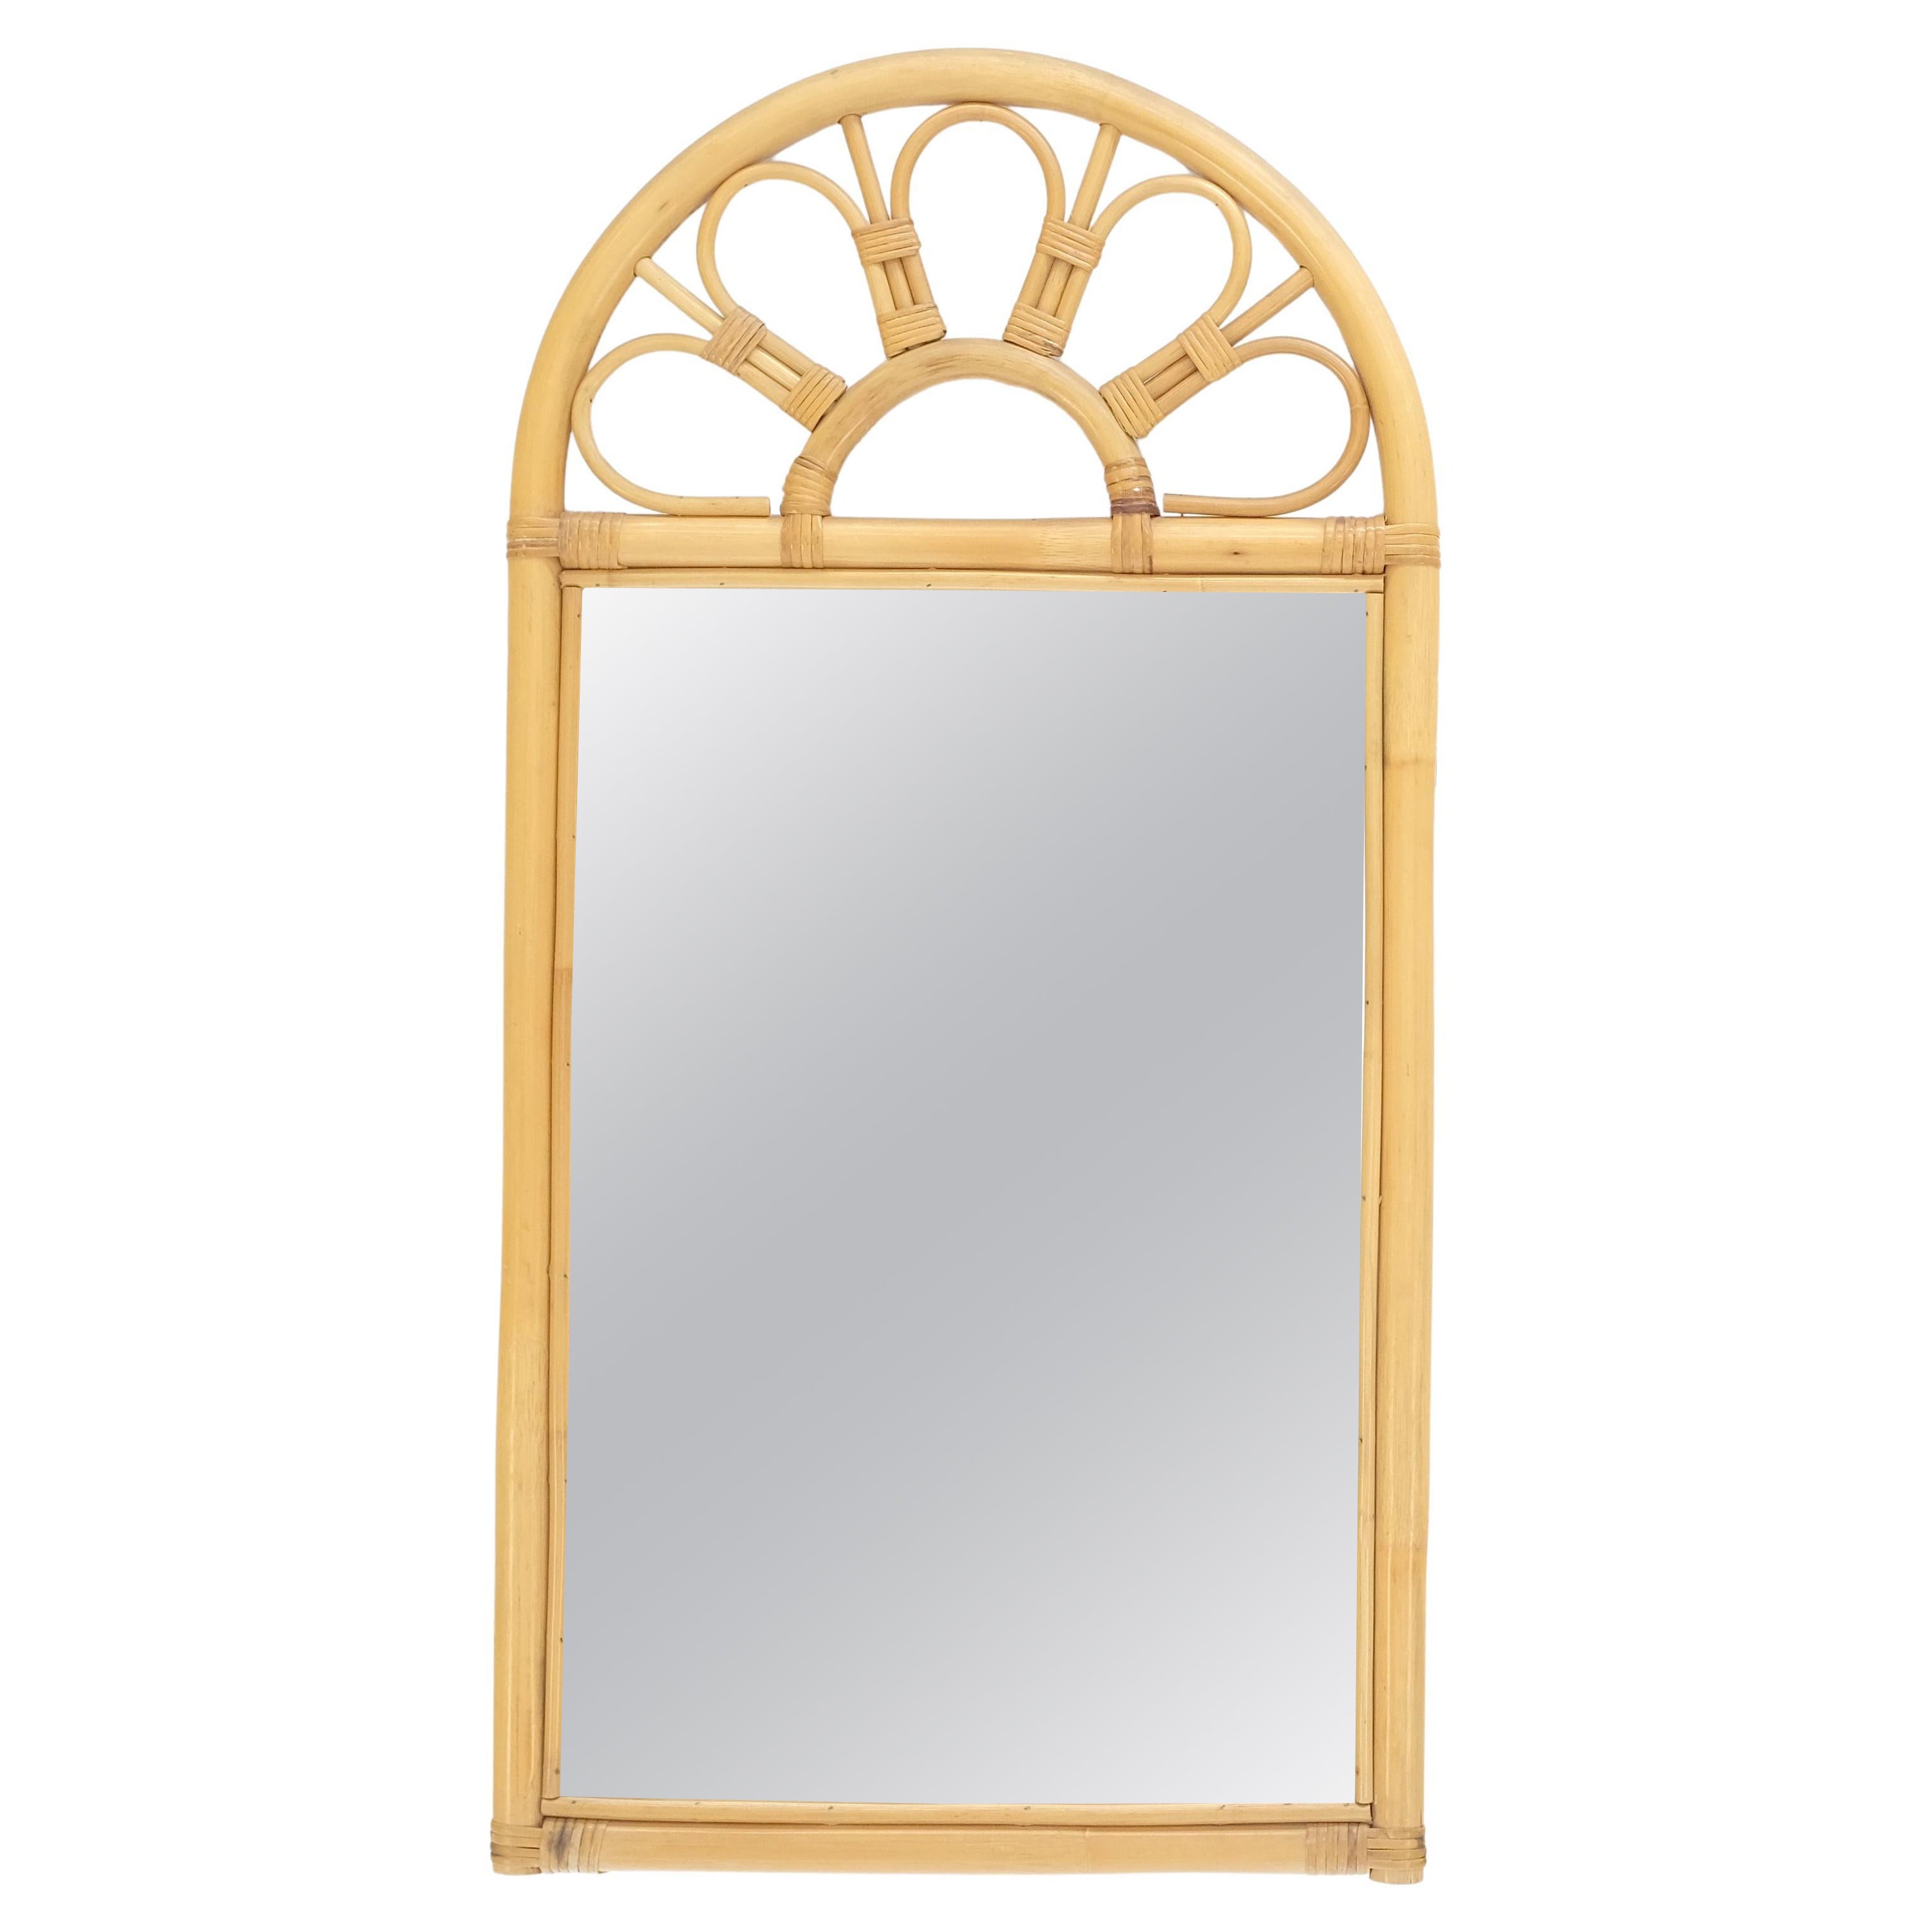 Blond Bamboo Ratan Dome Top Shape Mid Century Modern Wall Mirror MINT! For Sale